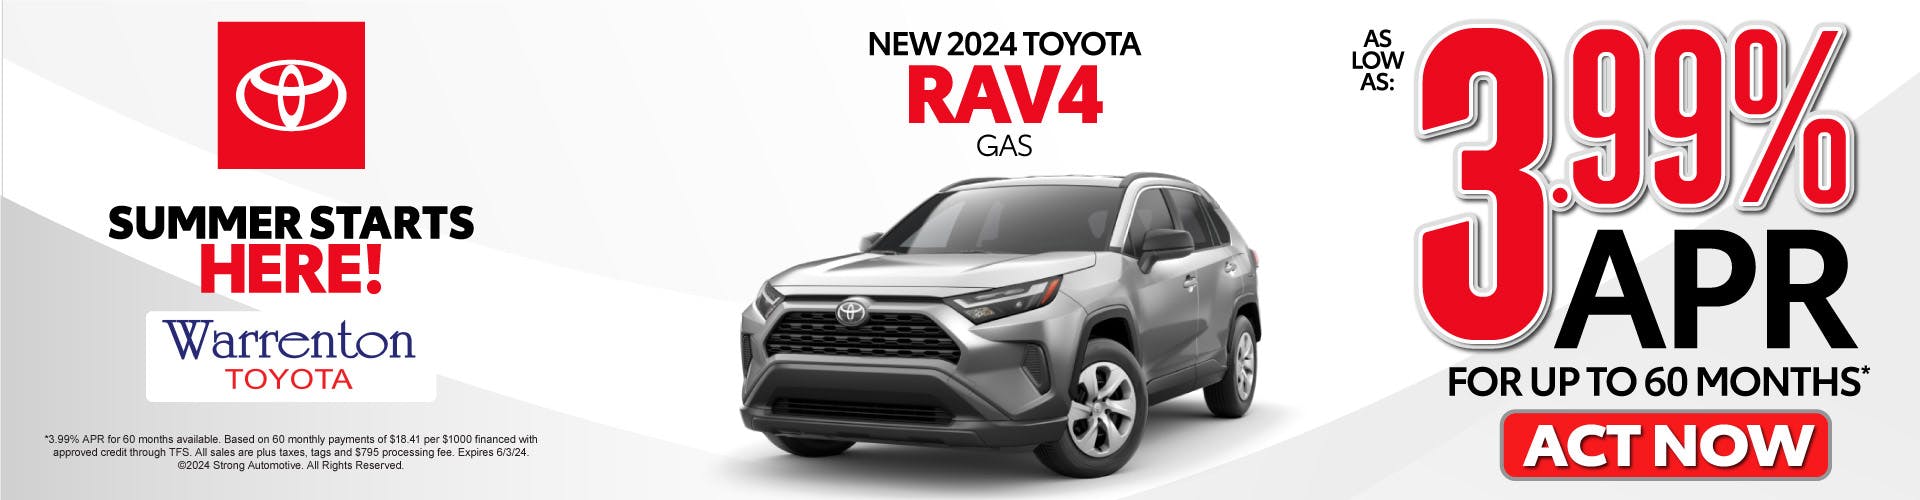 New 2024 Toyota RAV4 Gas – As Low as 3.99% APR for up to 60 months* – Act Now